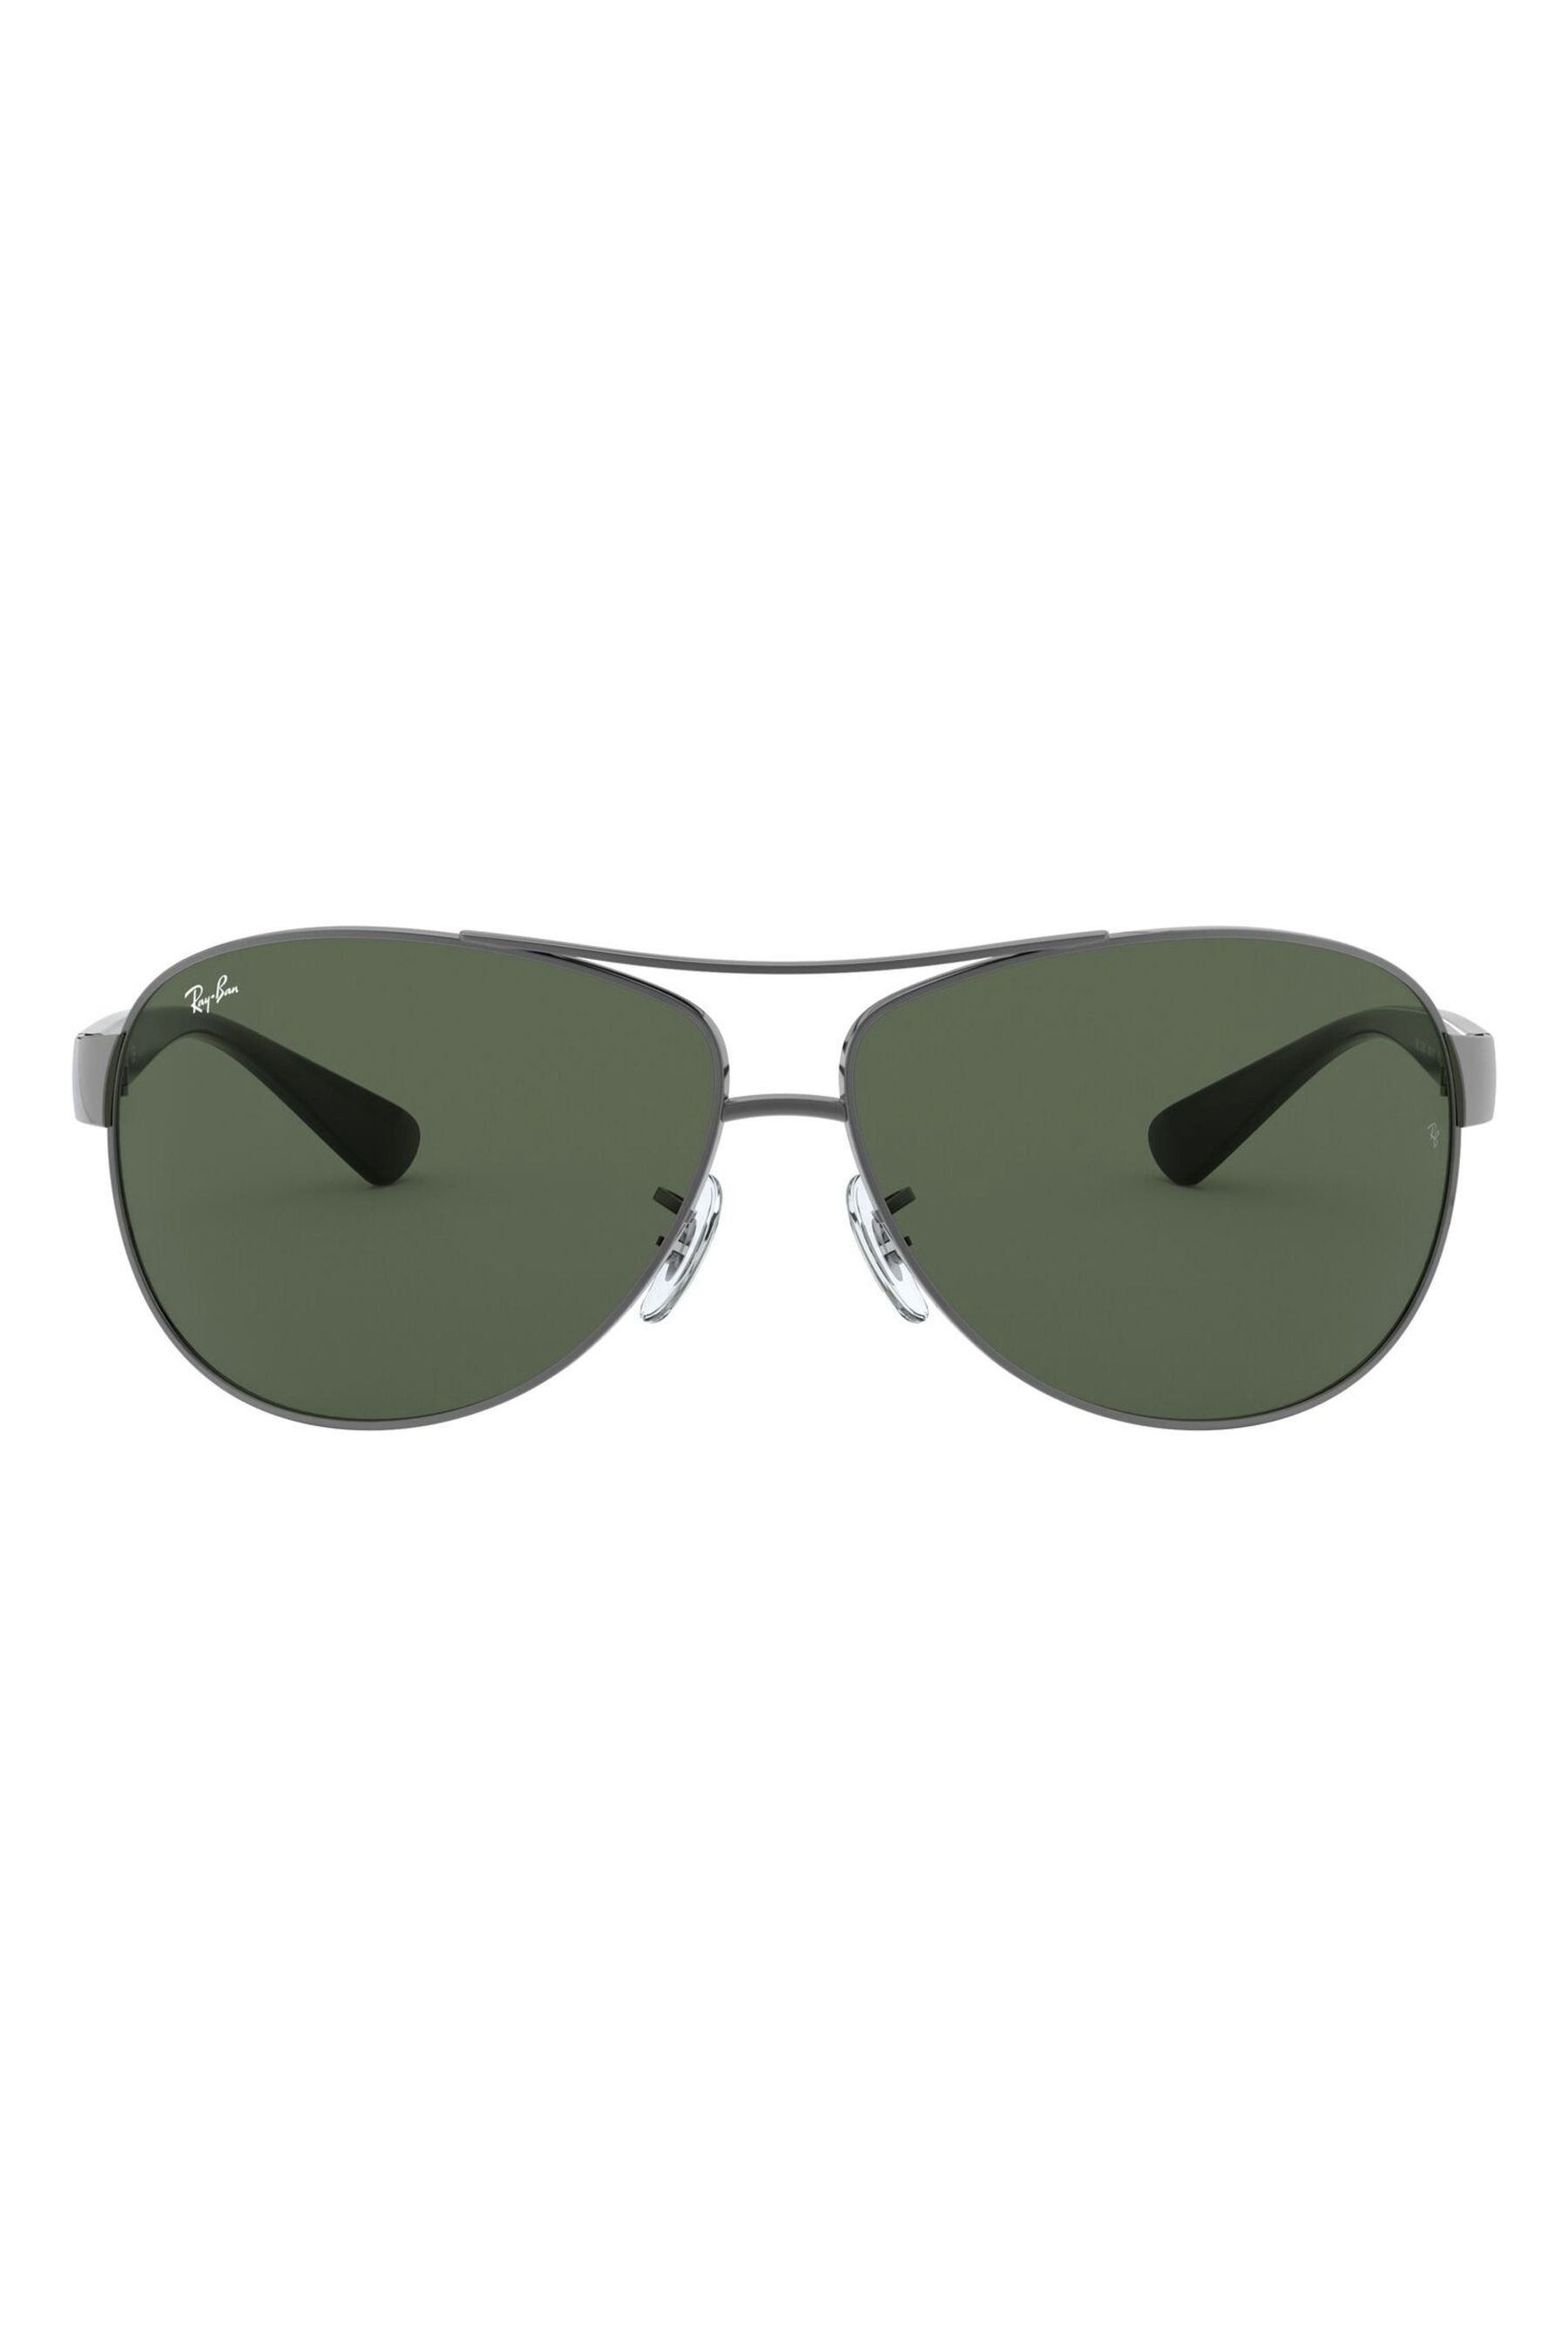 Buy Ray-Ban Cockpit Sunglasses from the Next UK online shop